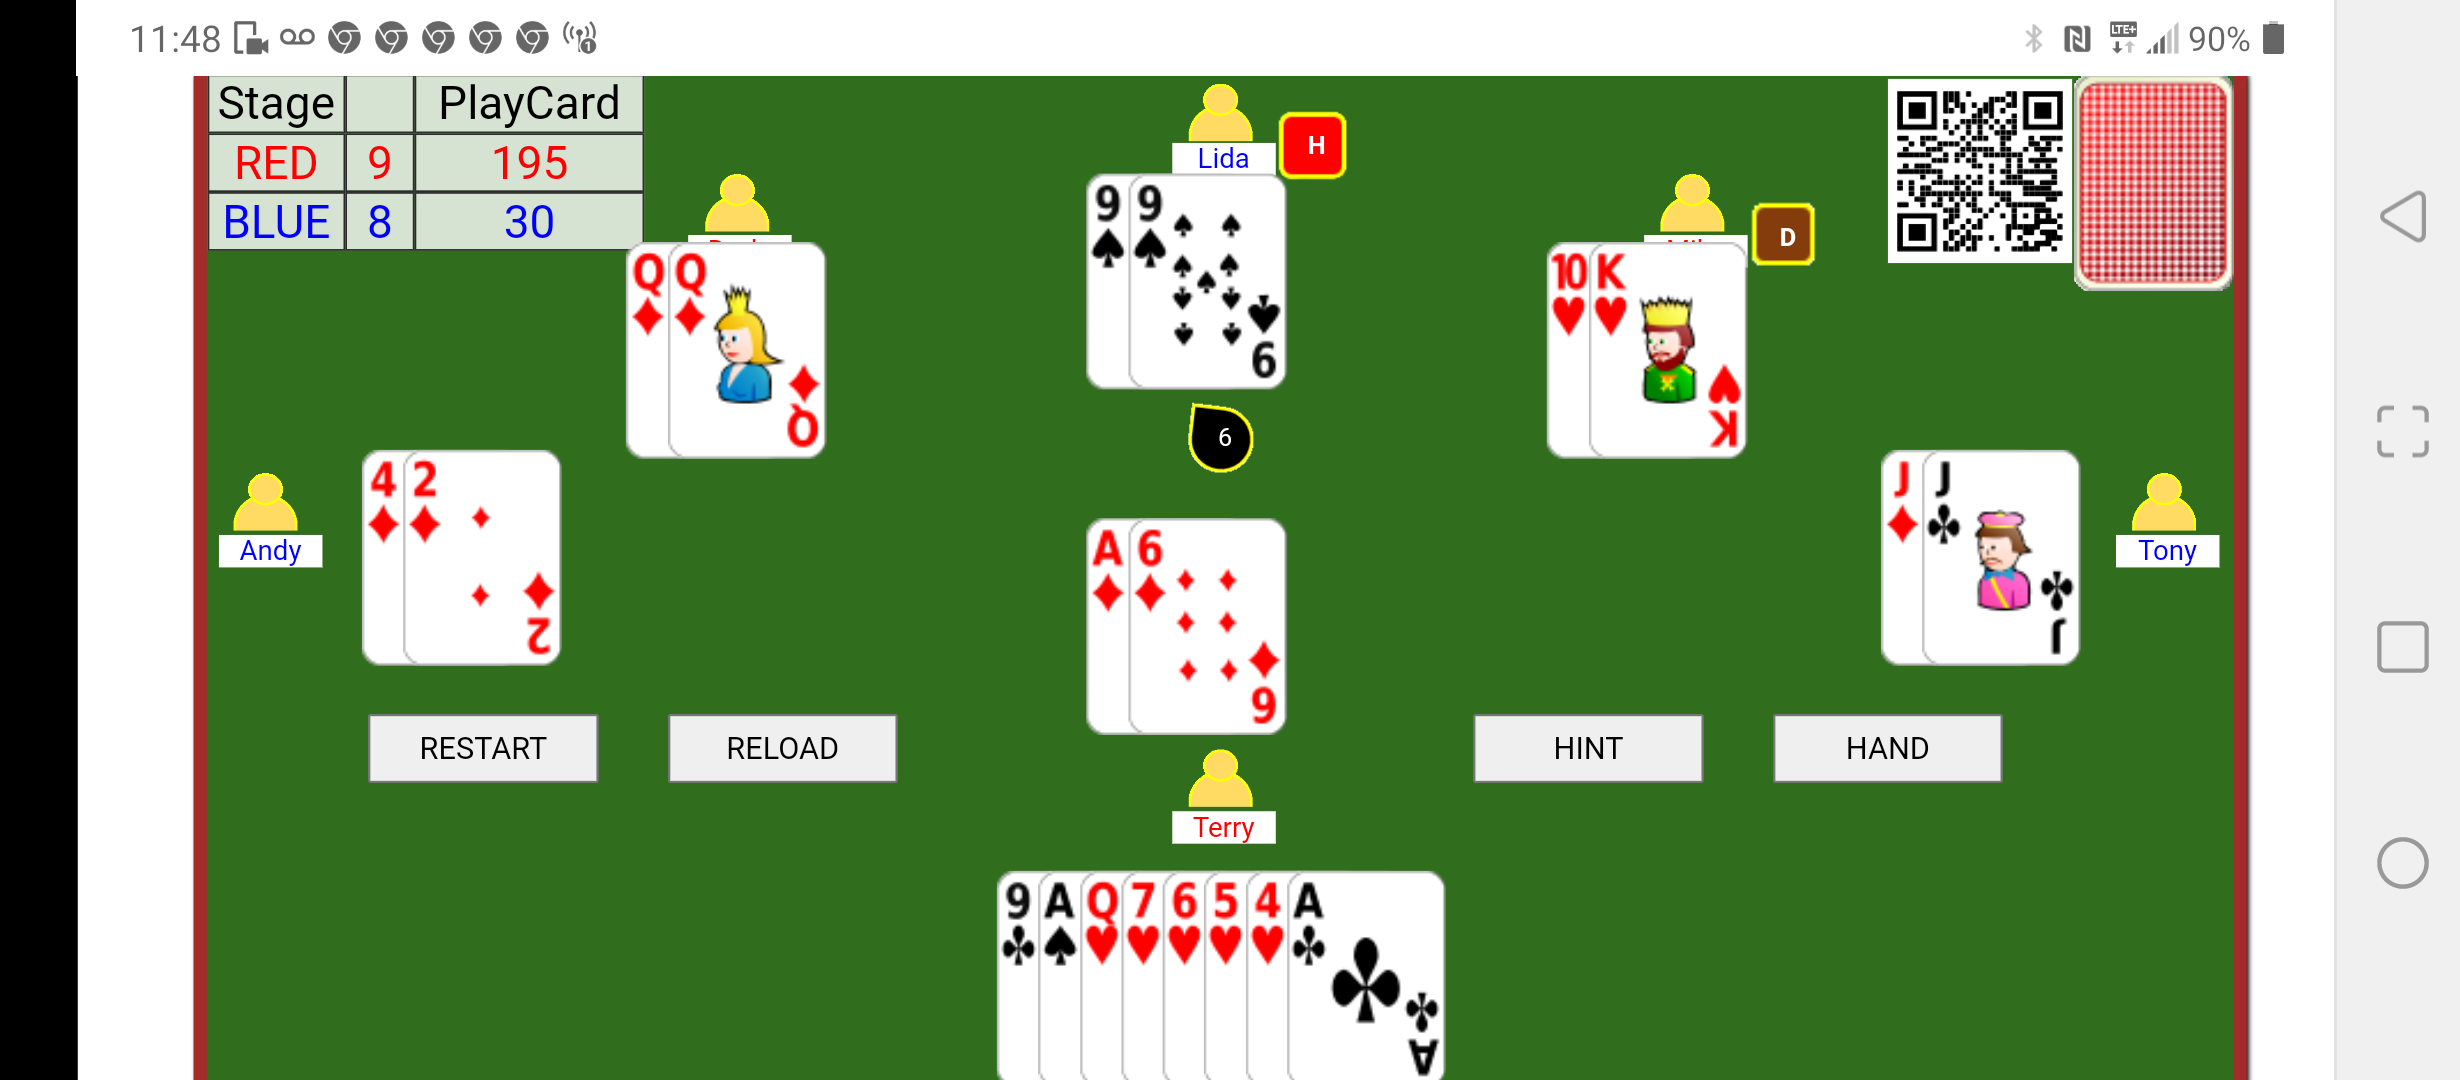 html5 tractor card game Screenshot_20220120-114812.png